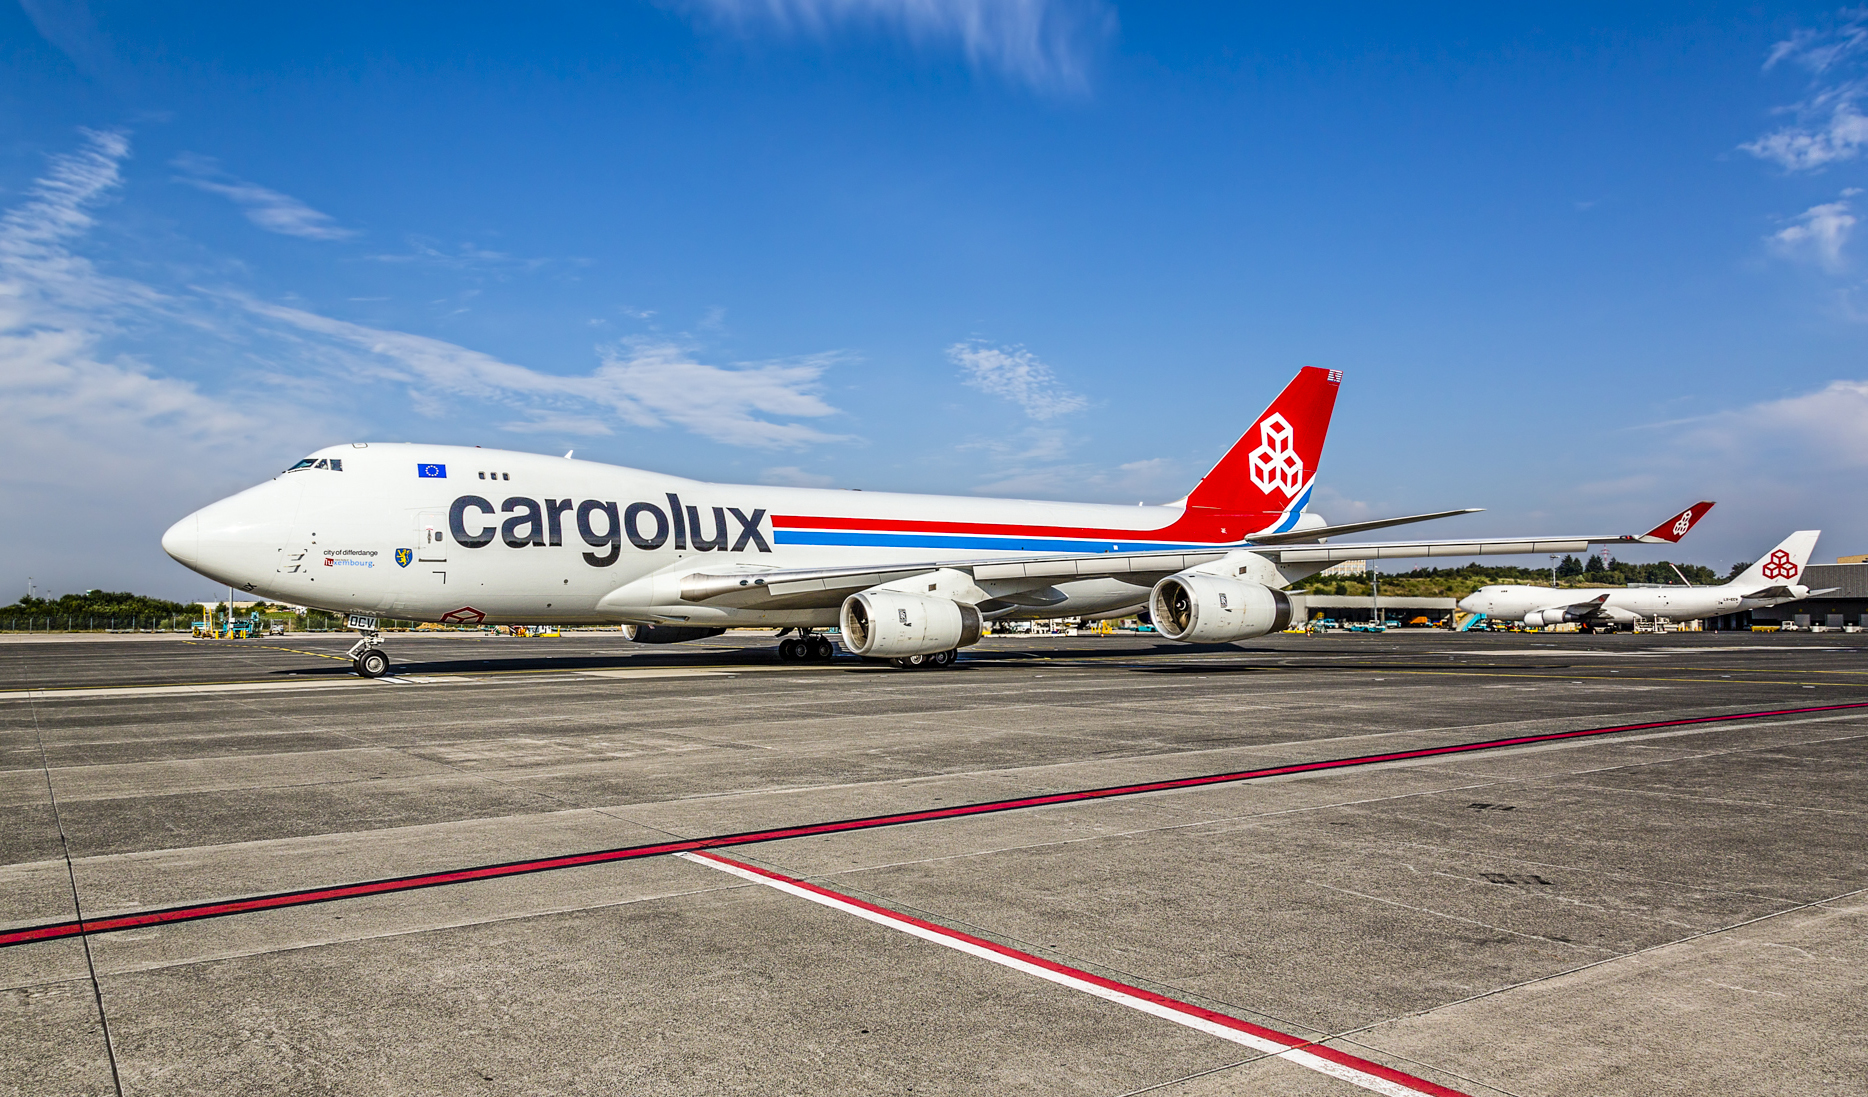 LATAM Cargo targets pharma and automotive with new